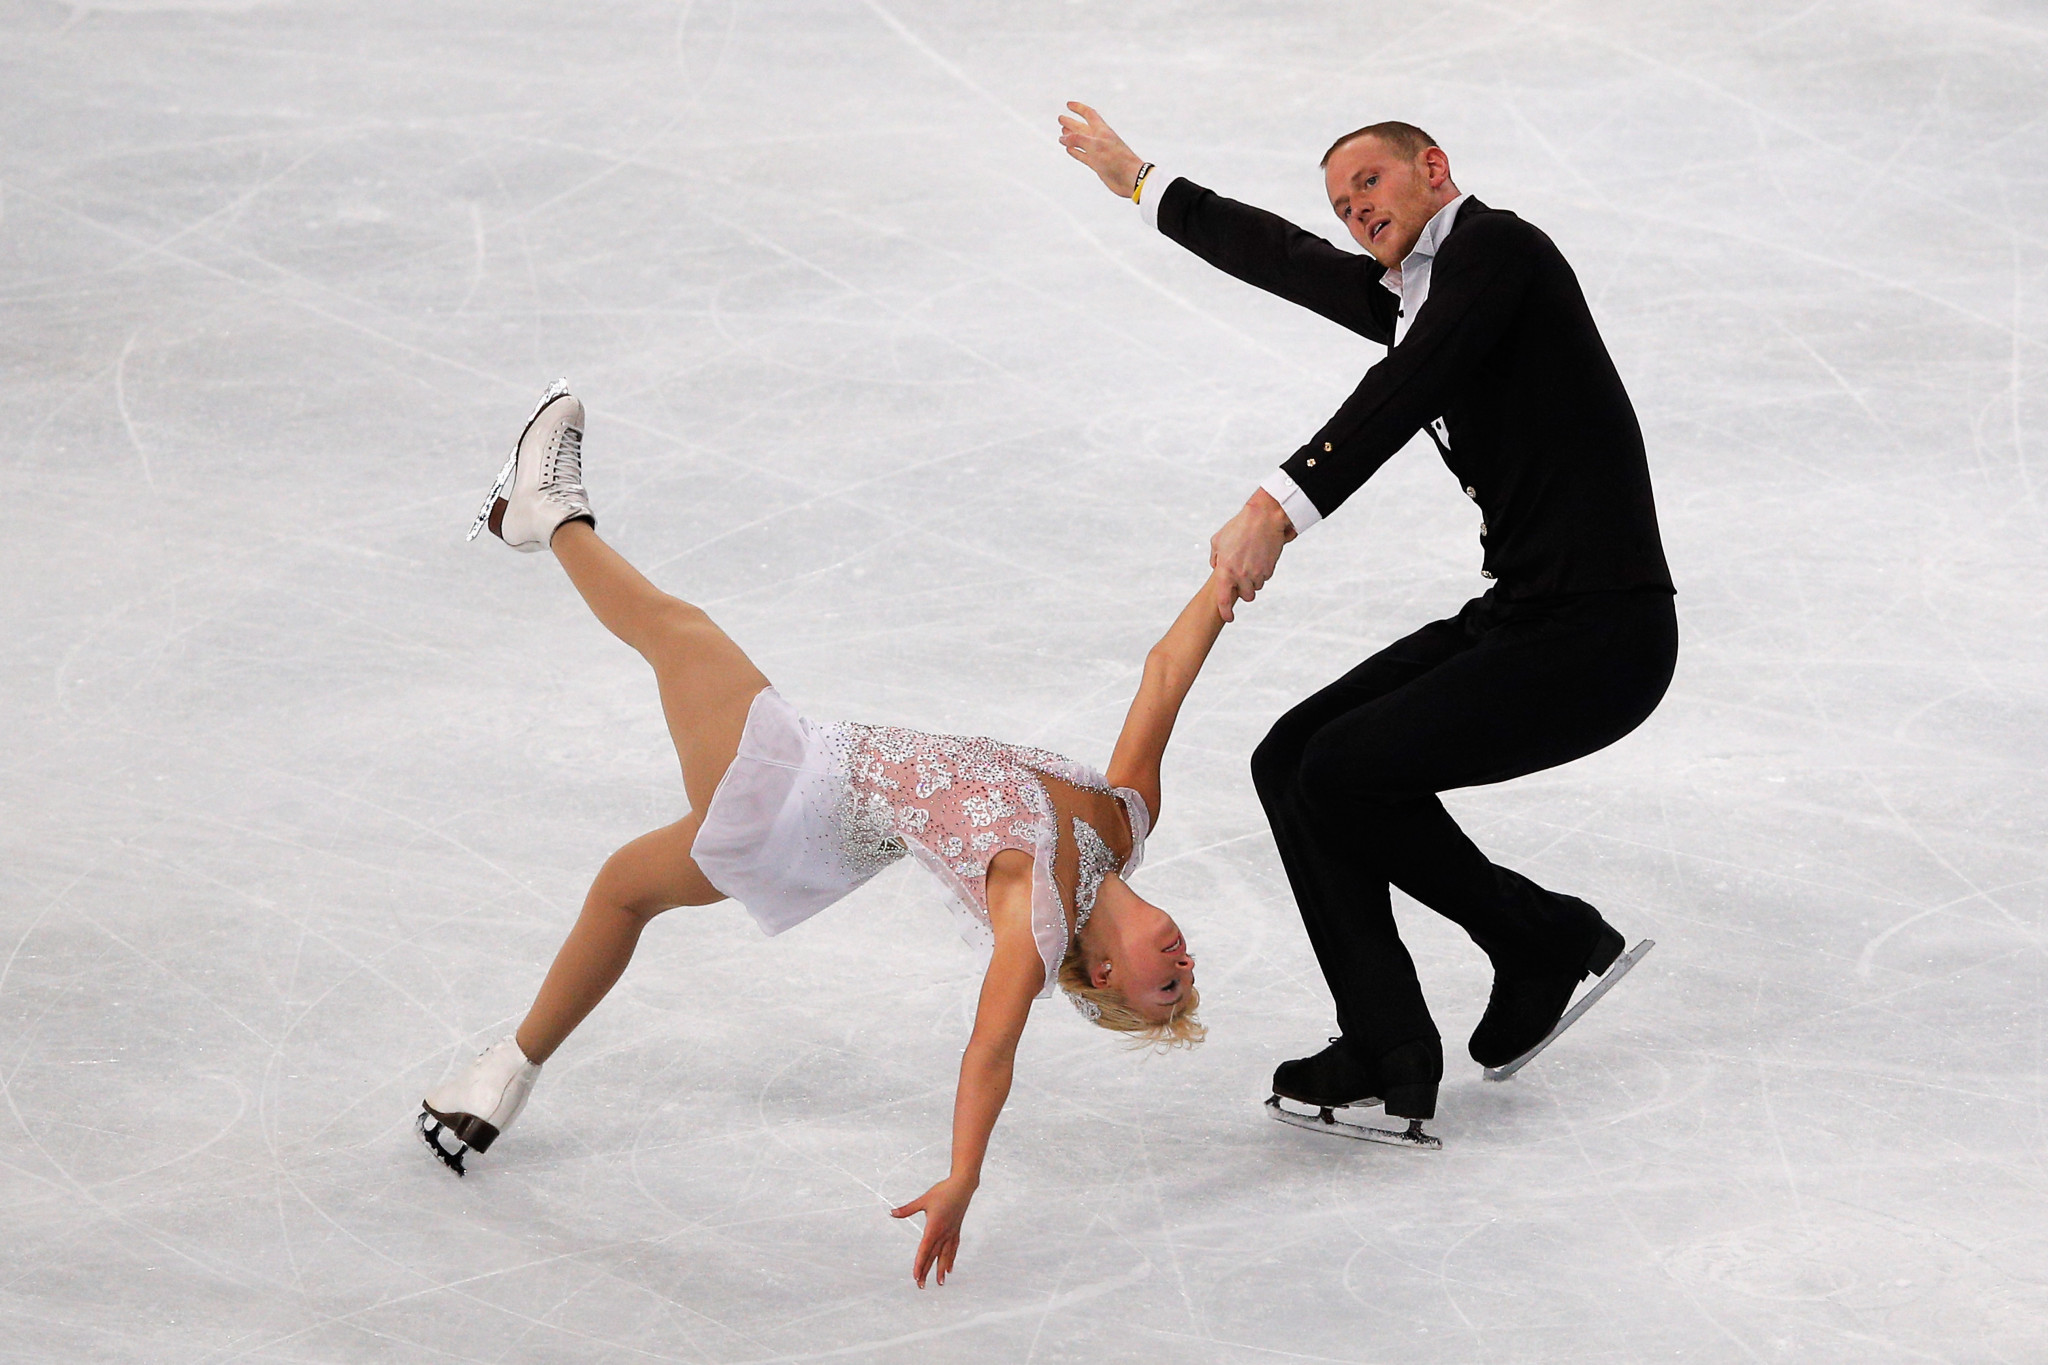 John Coughlin was a two-time United States pairs figure skating champion ©Getty Images